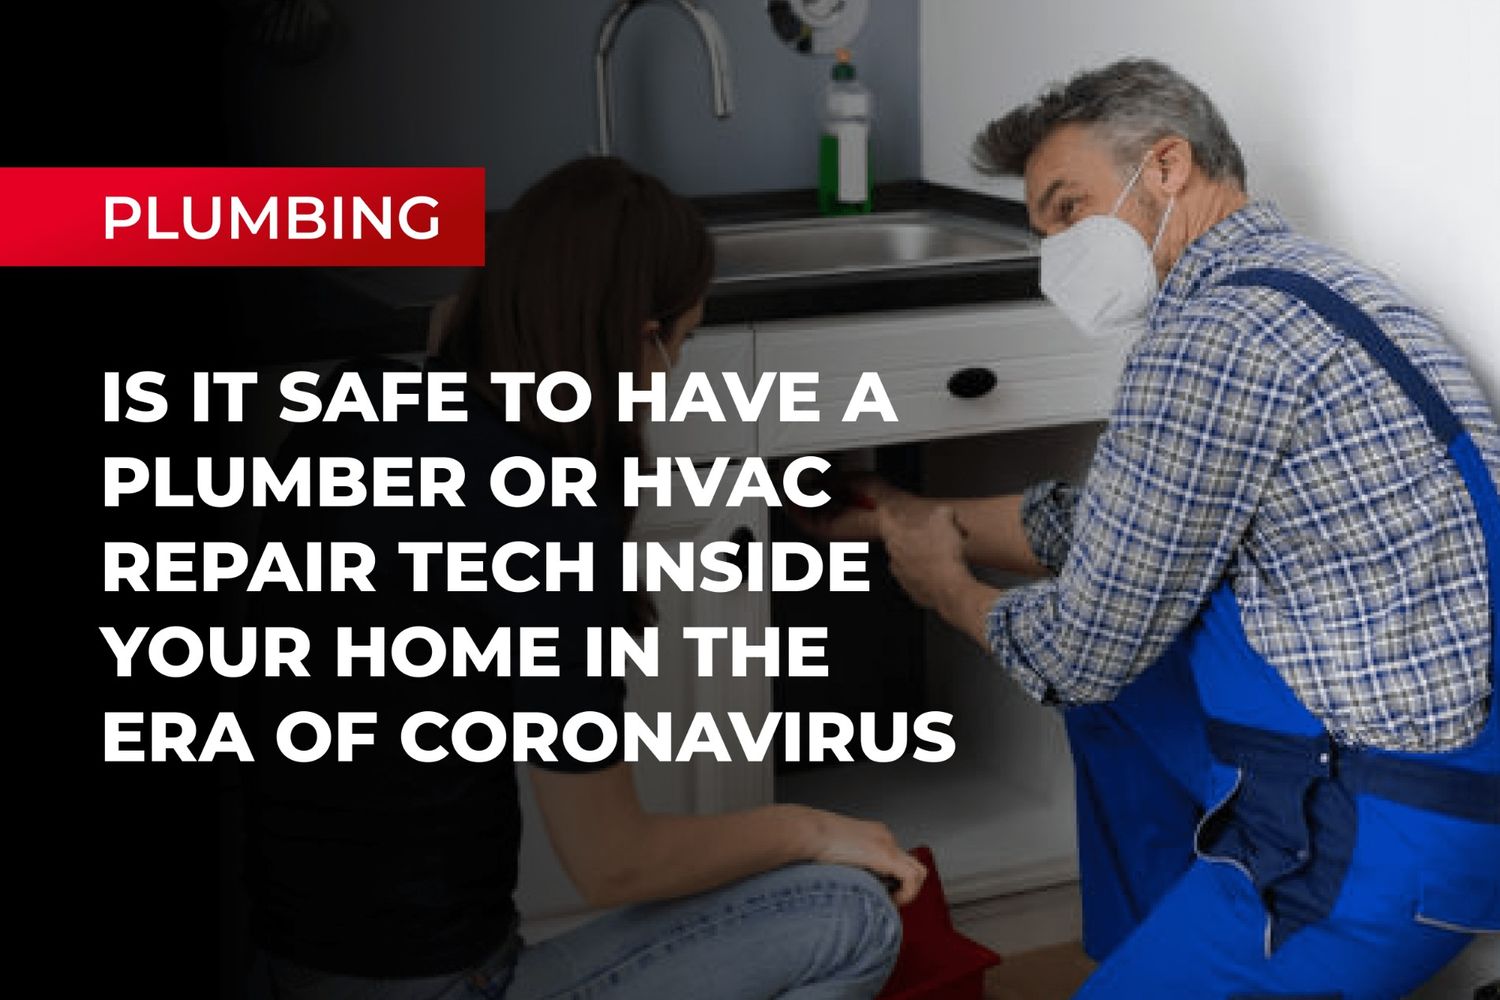 Is It Safe to Have a Plumber or HVAC Repair Tech Inside Your Home in The Era of Coronavirus?